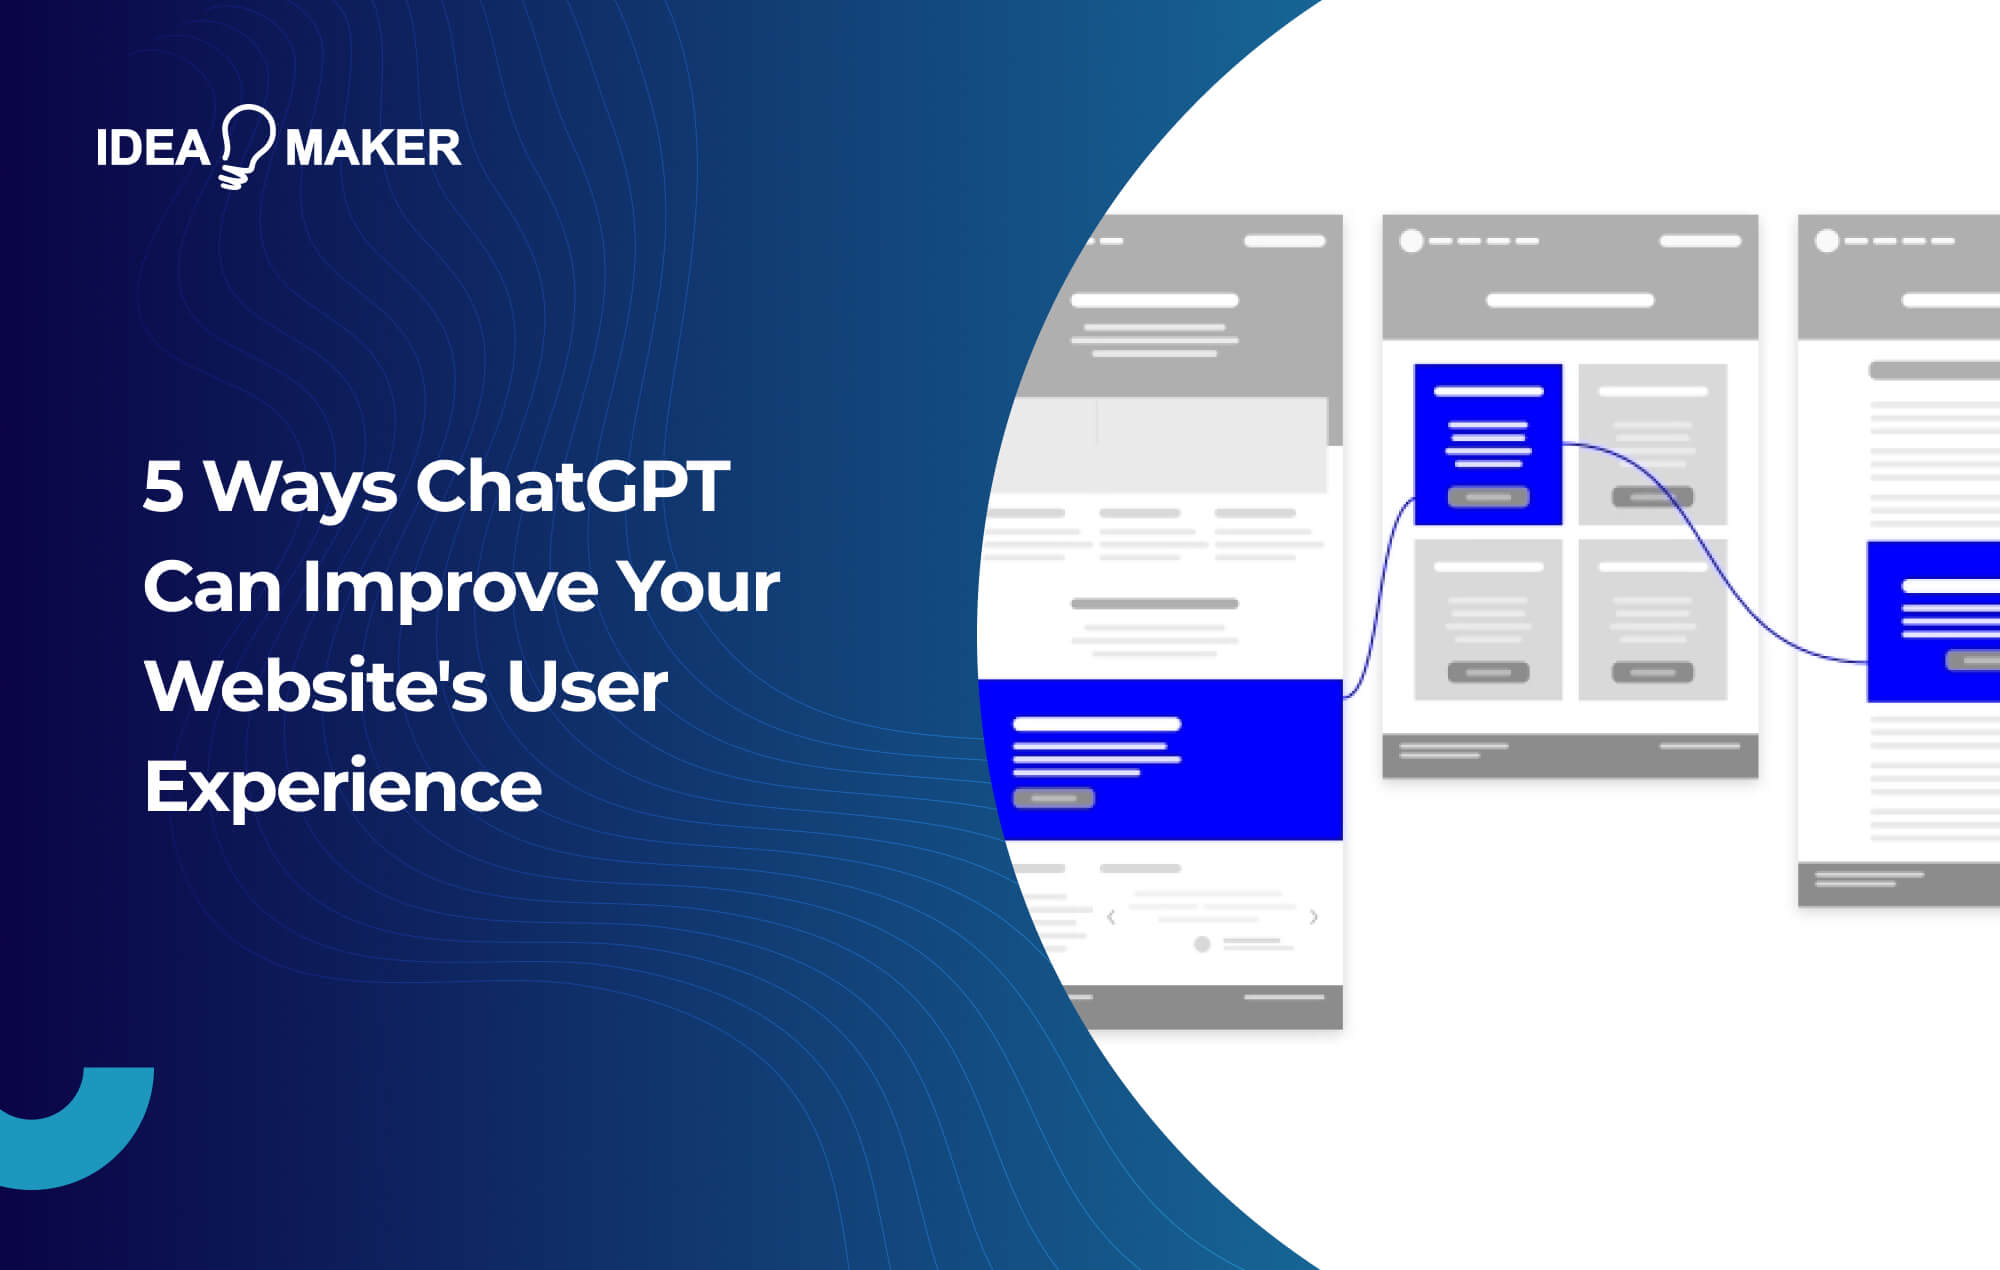 Ideamaker - 5 Ways ChatGPT Can Improve Your Website's User Experience